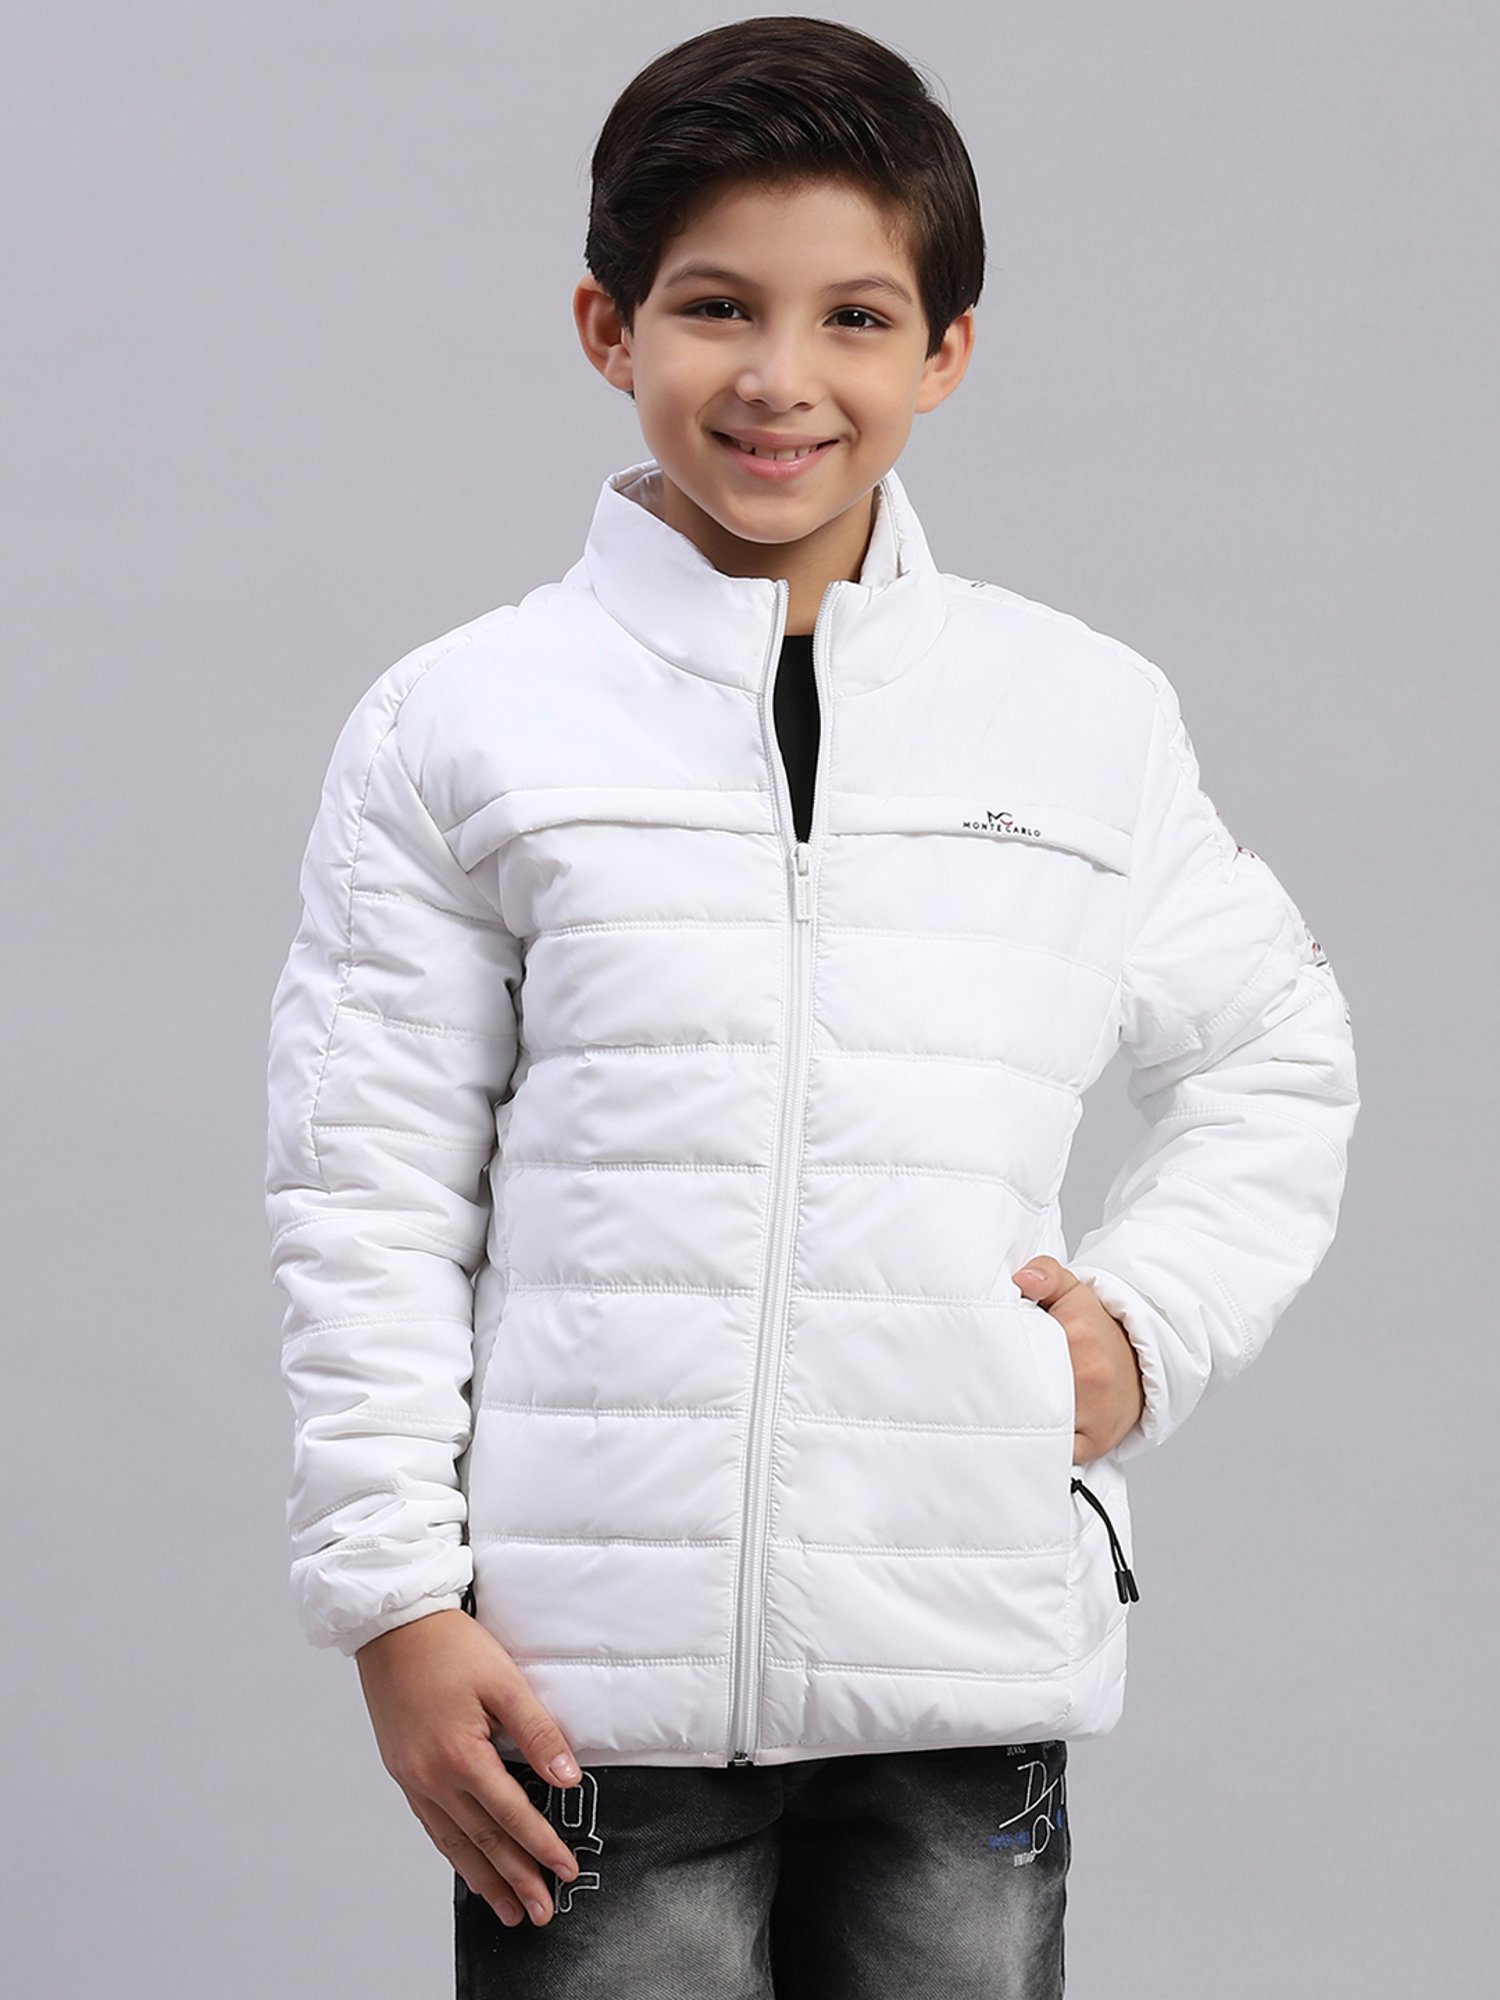 Buy Boys Red & Navy Reversible Solid Jacket Online in India - Monte Carlo